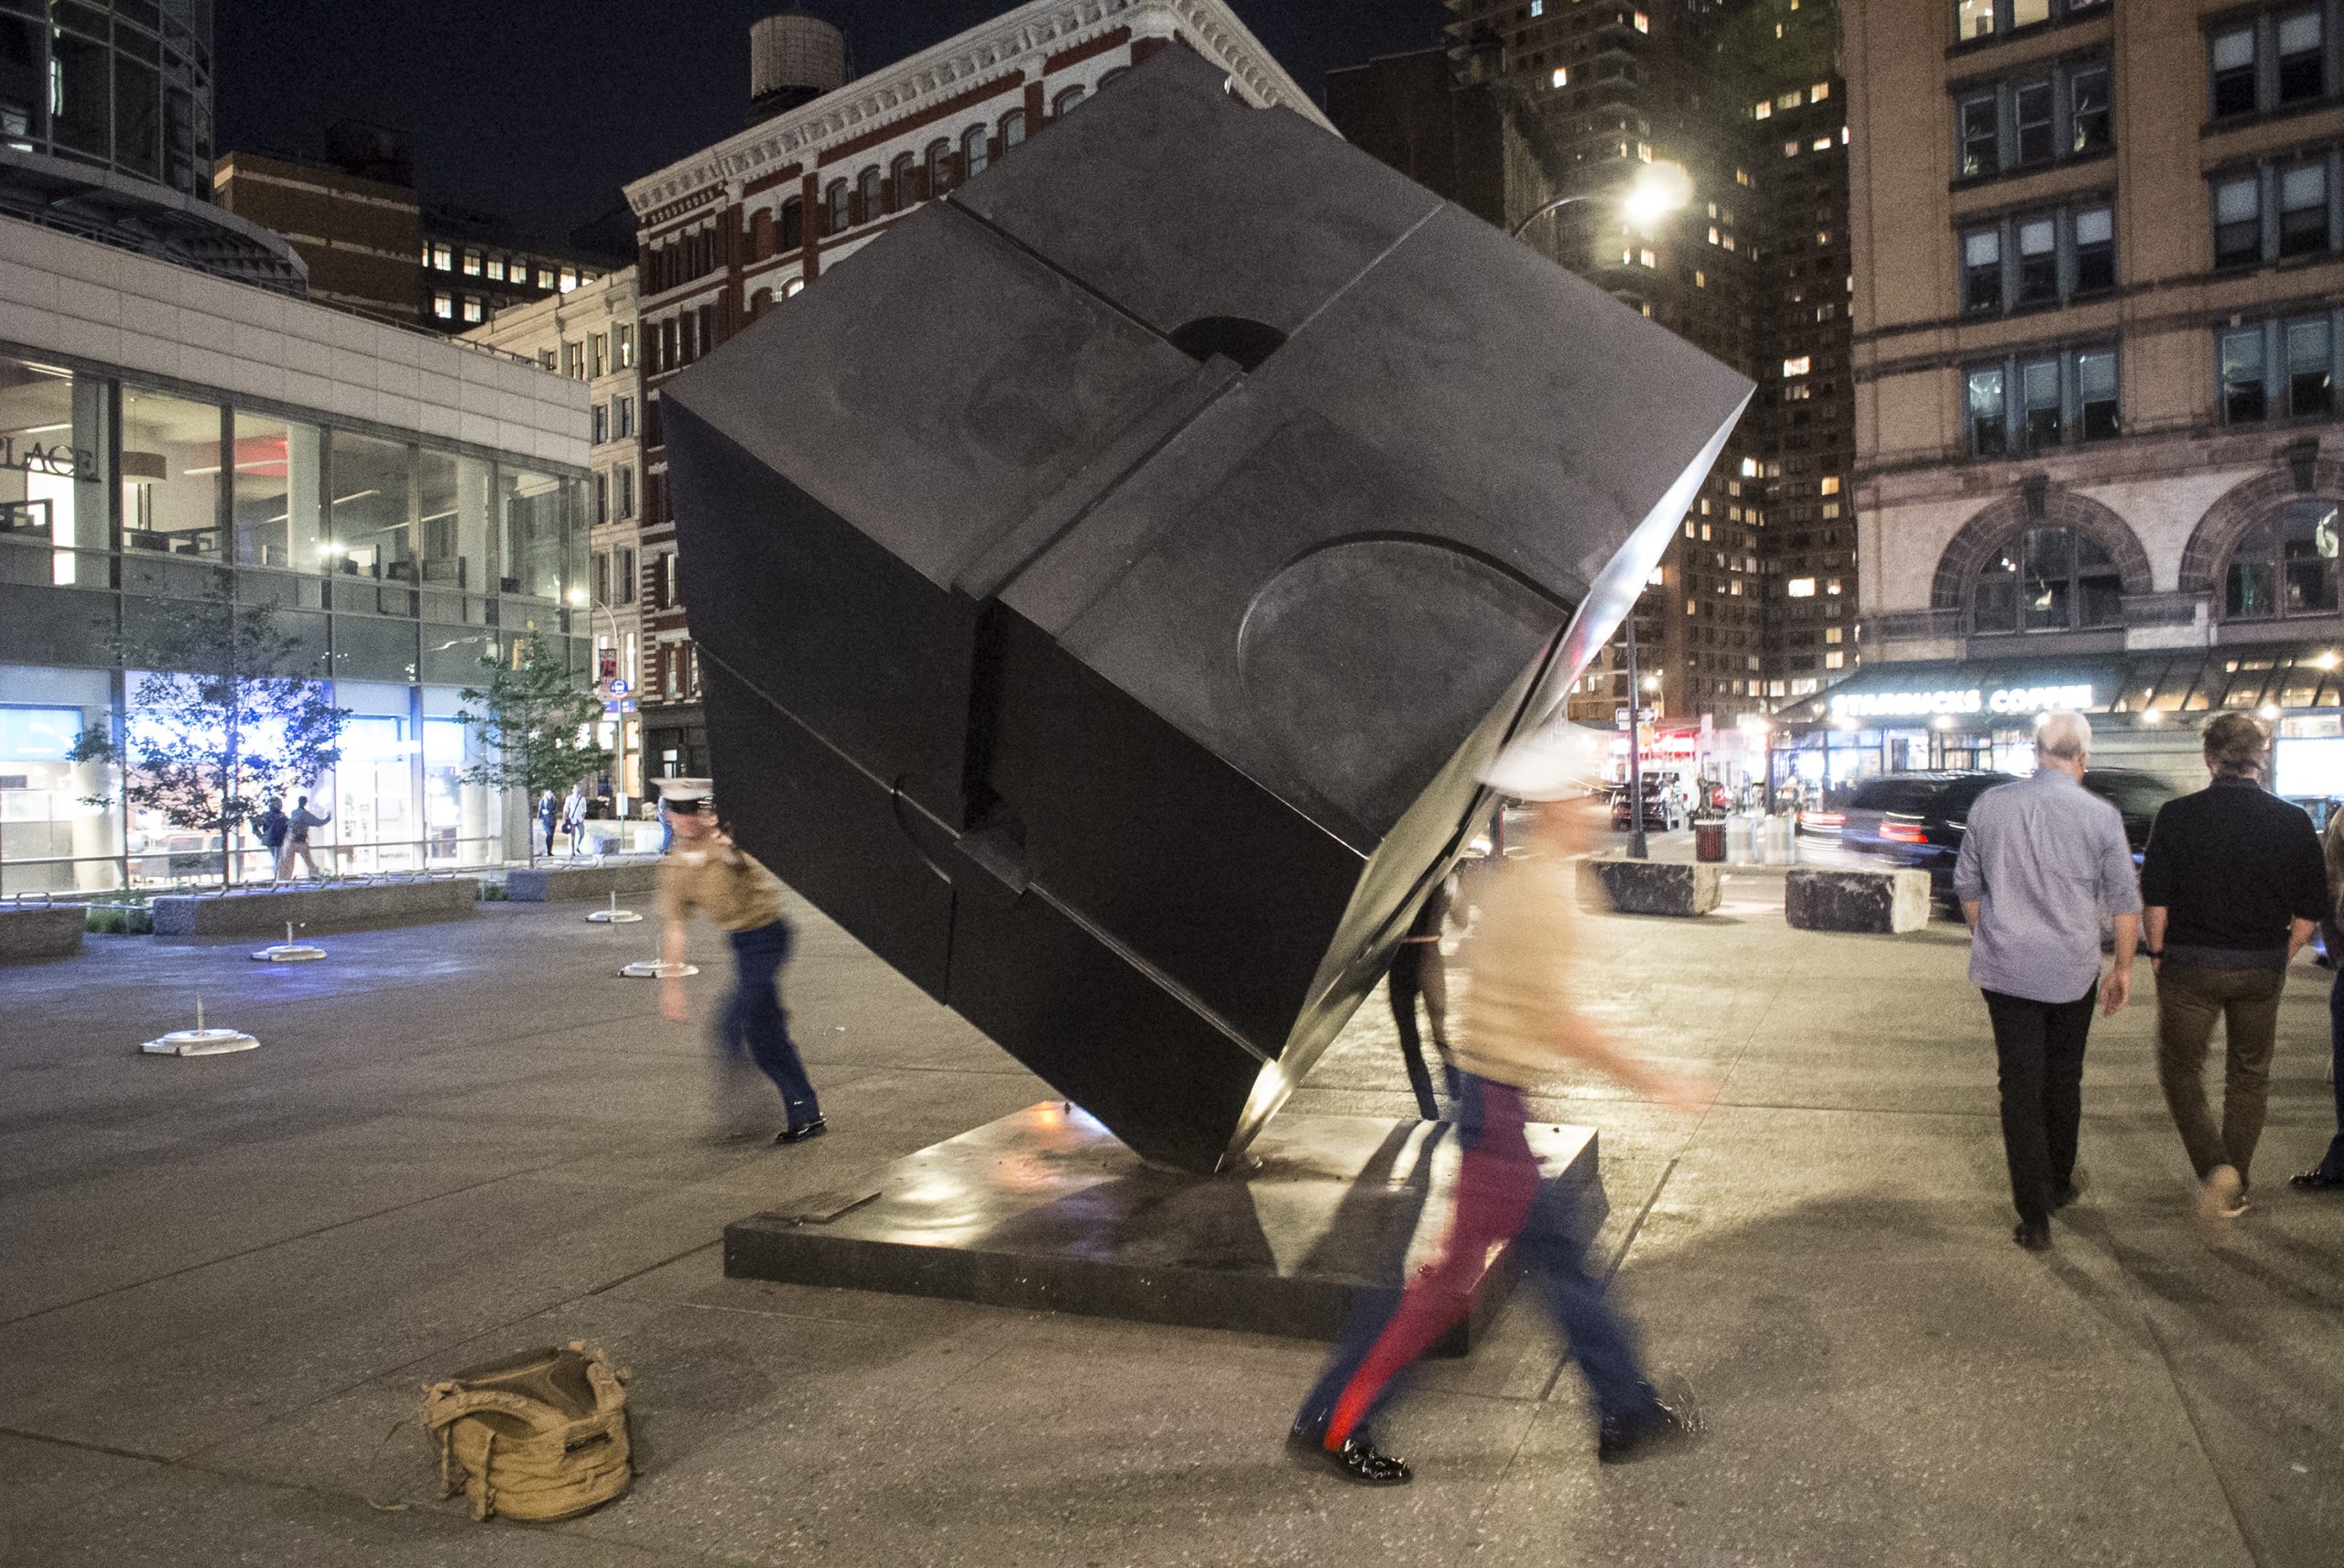 Cube Finally Astor Place The Beloved Returns!